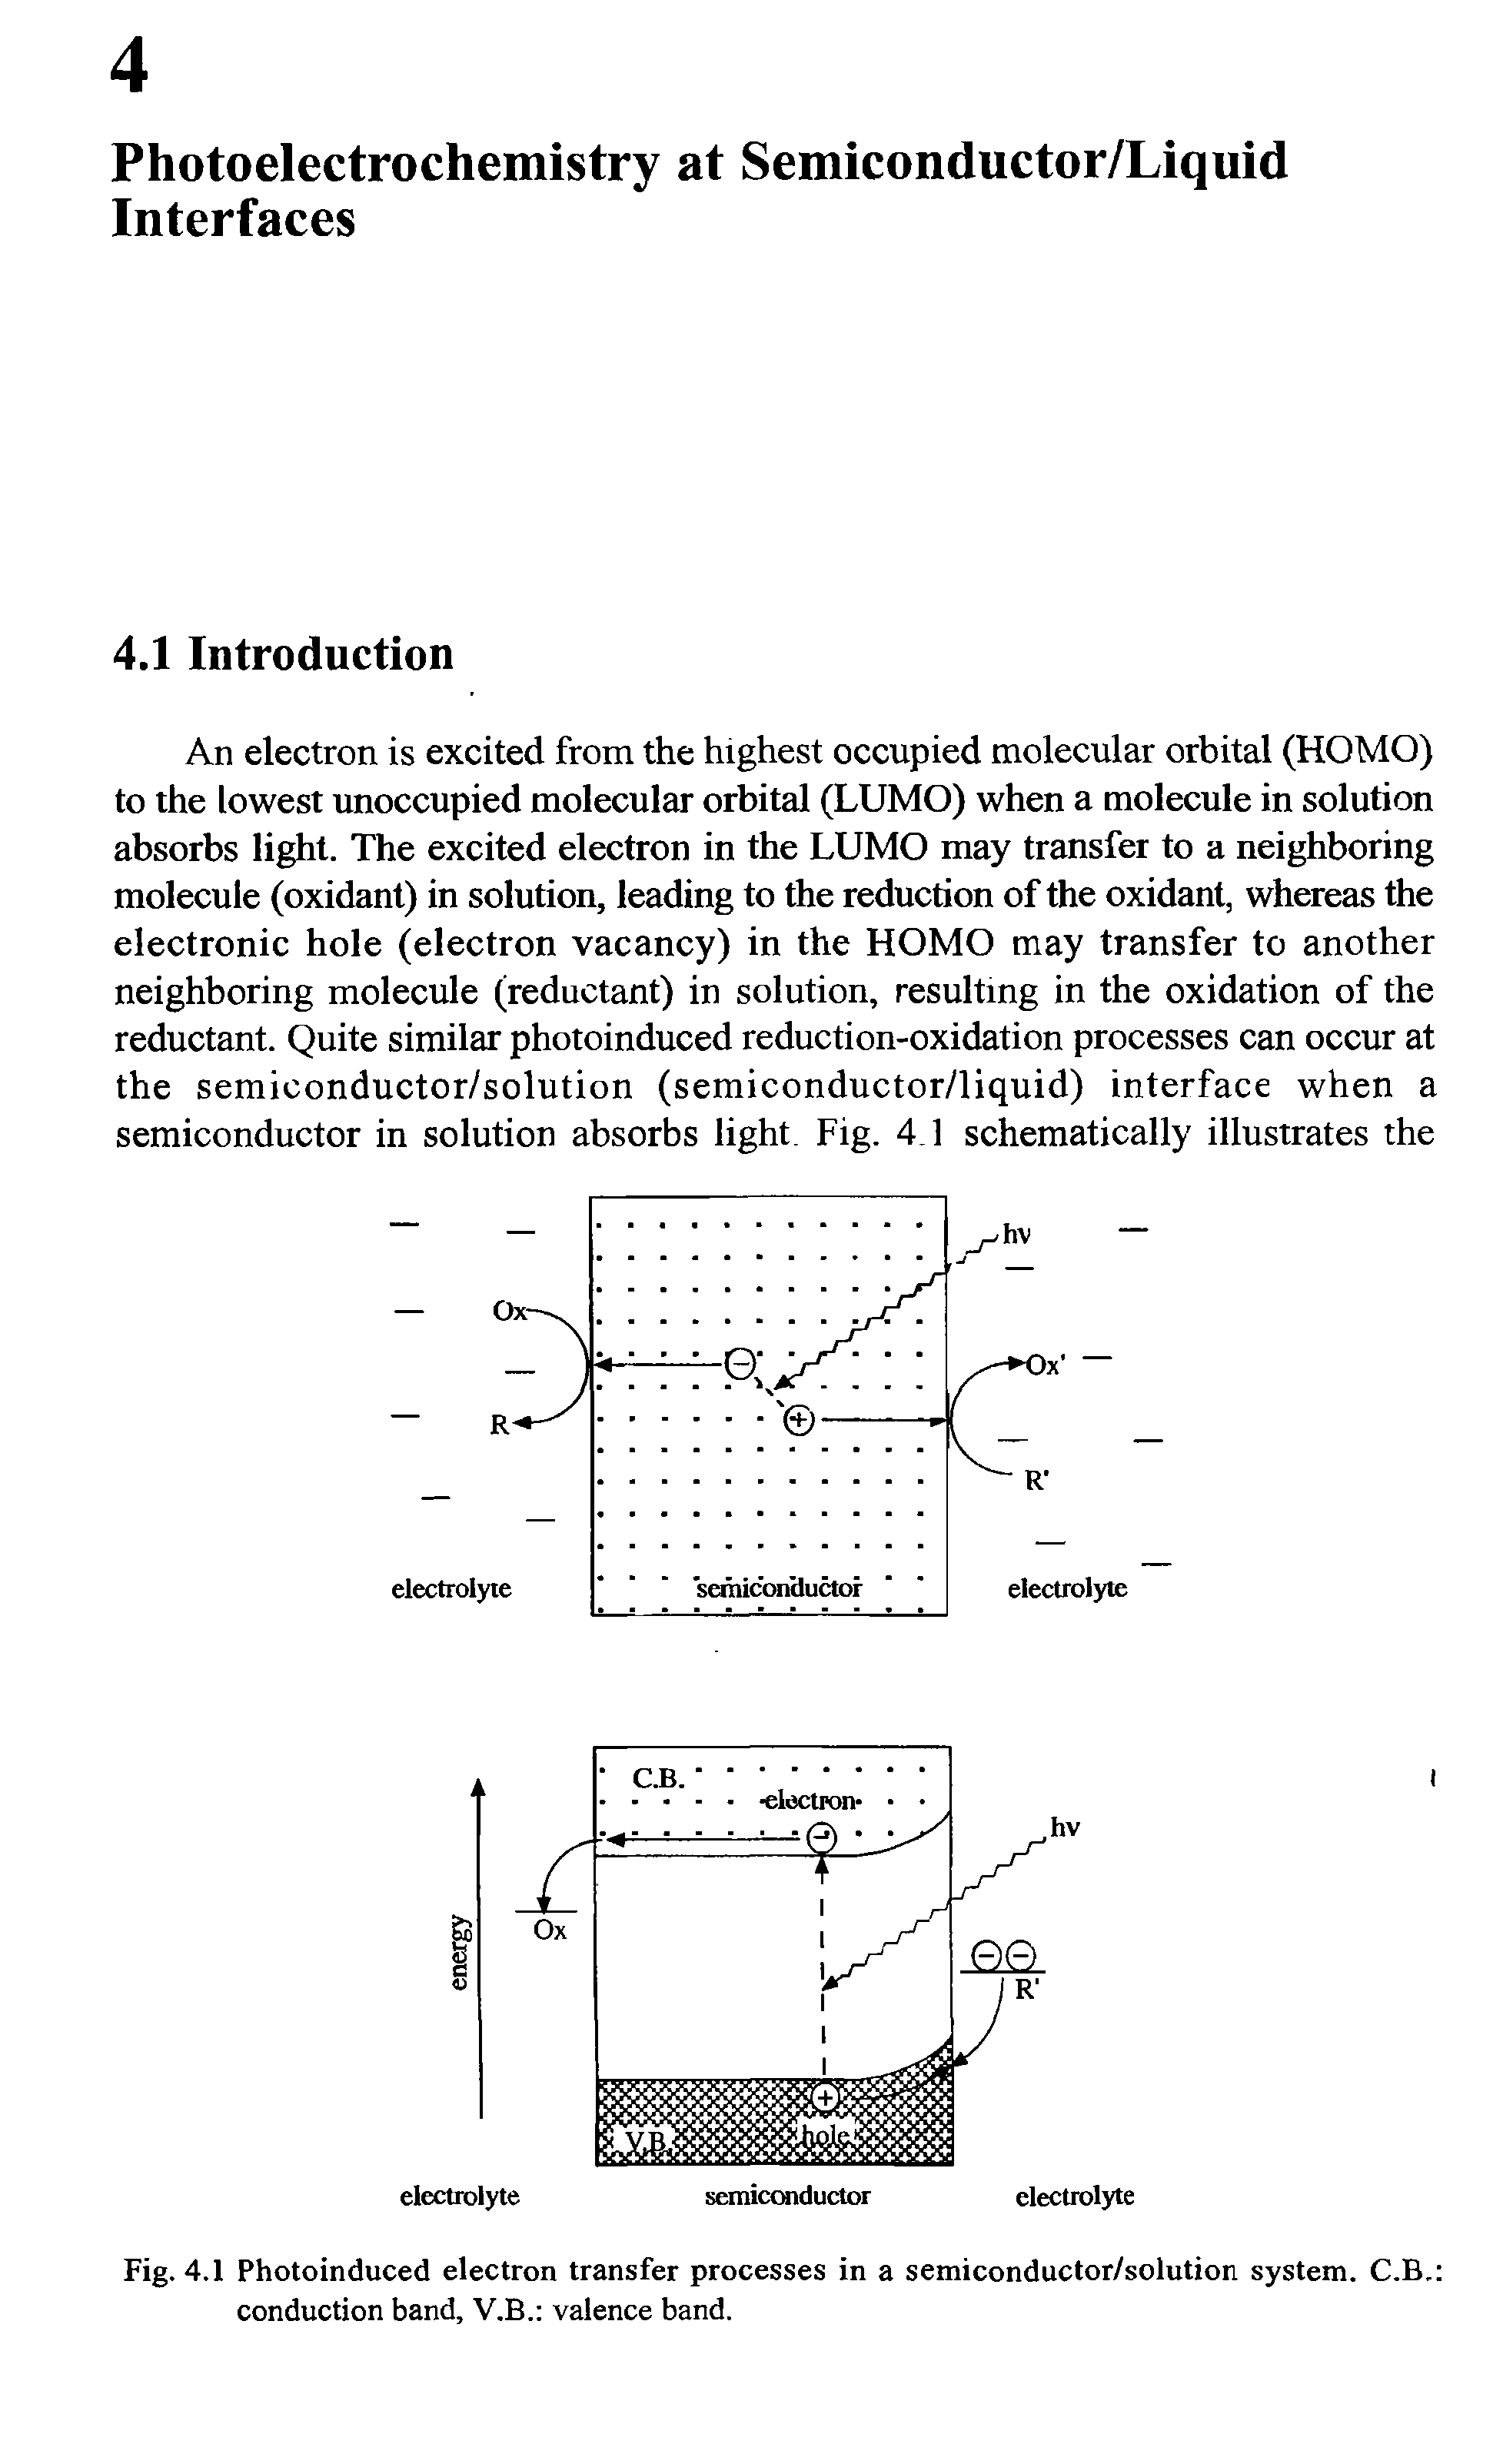 Fig. 4.1 Photoinduced electron transfer processes in a semiconductor/solution system. C.B. conduction band, V.B. valence band.